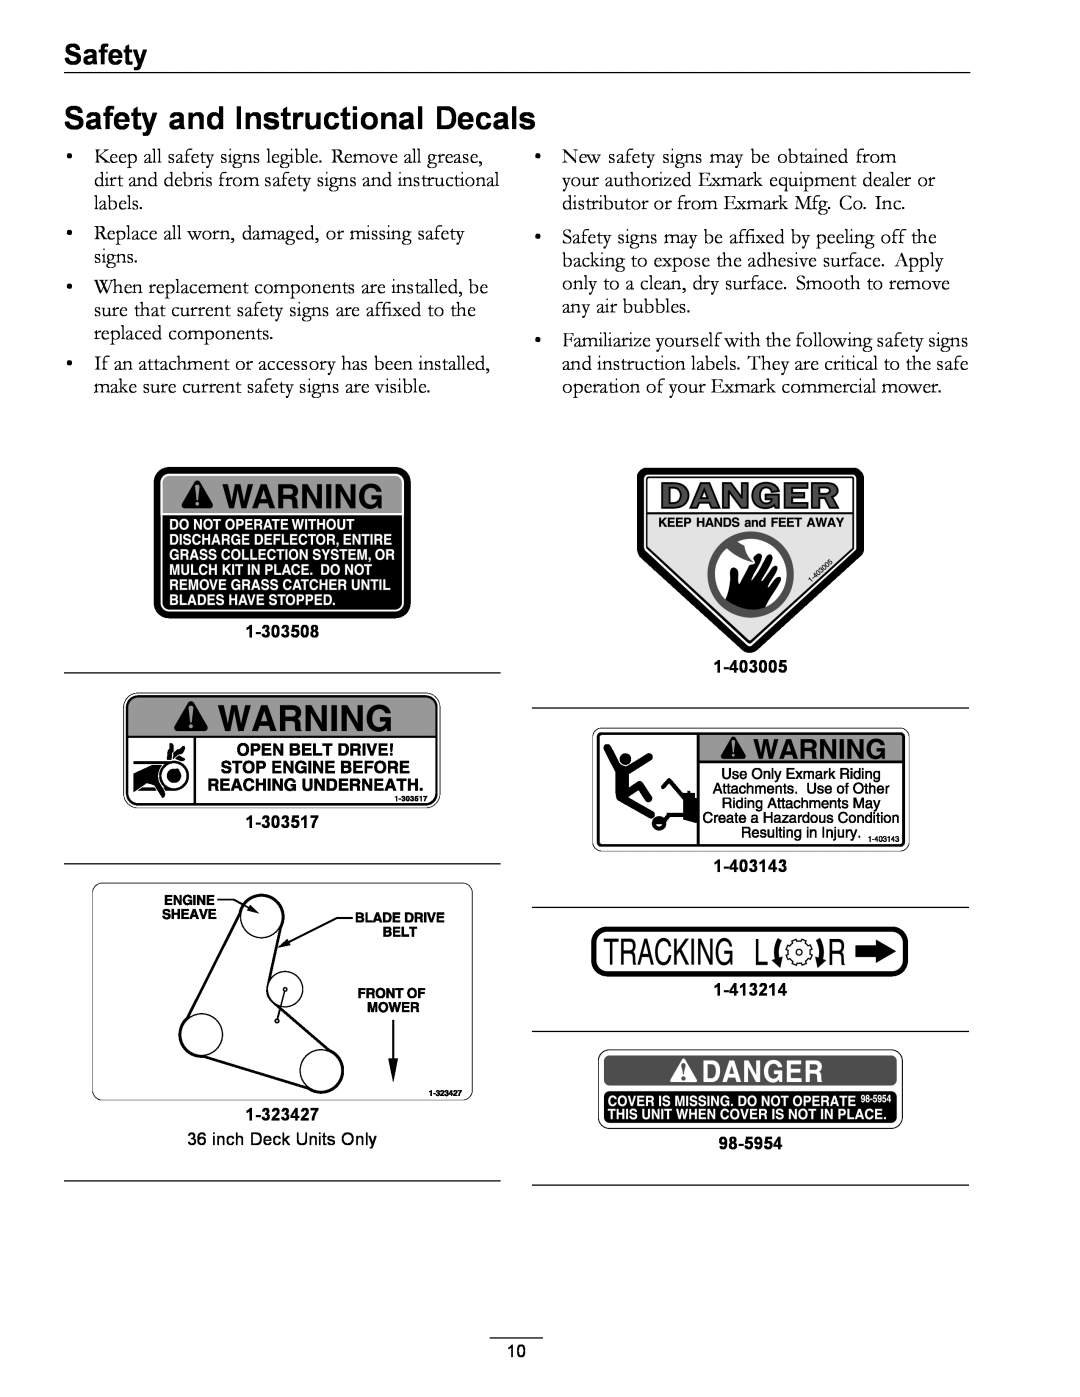 Exmark 4500-355 manual Safety and Instructional Decals 